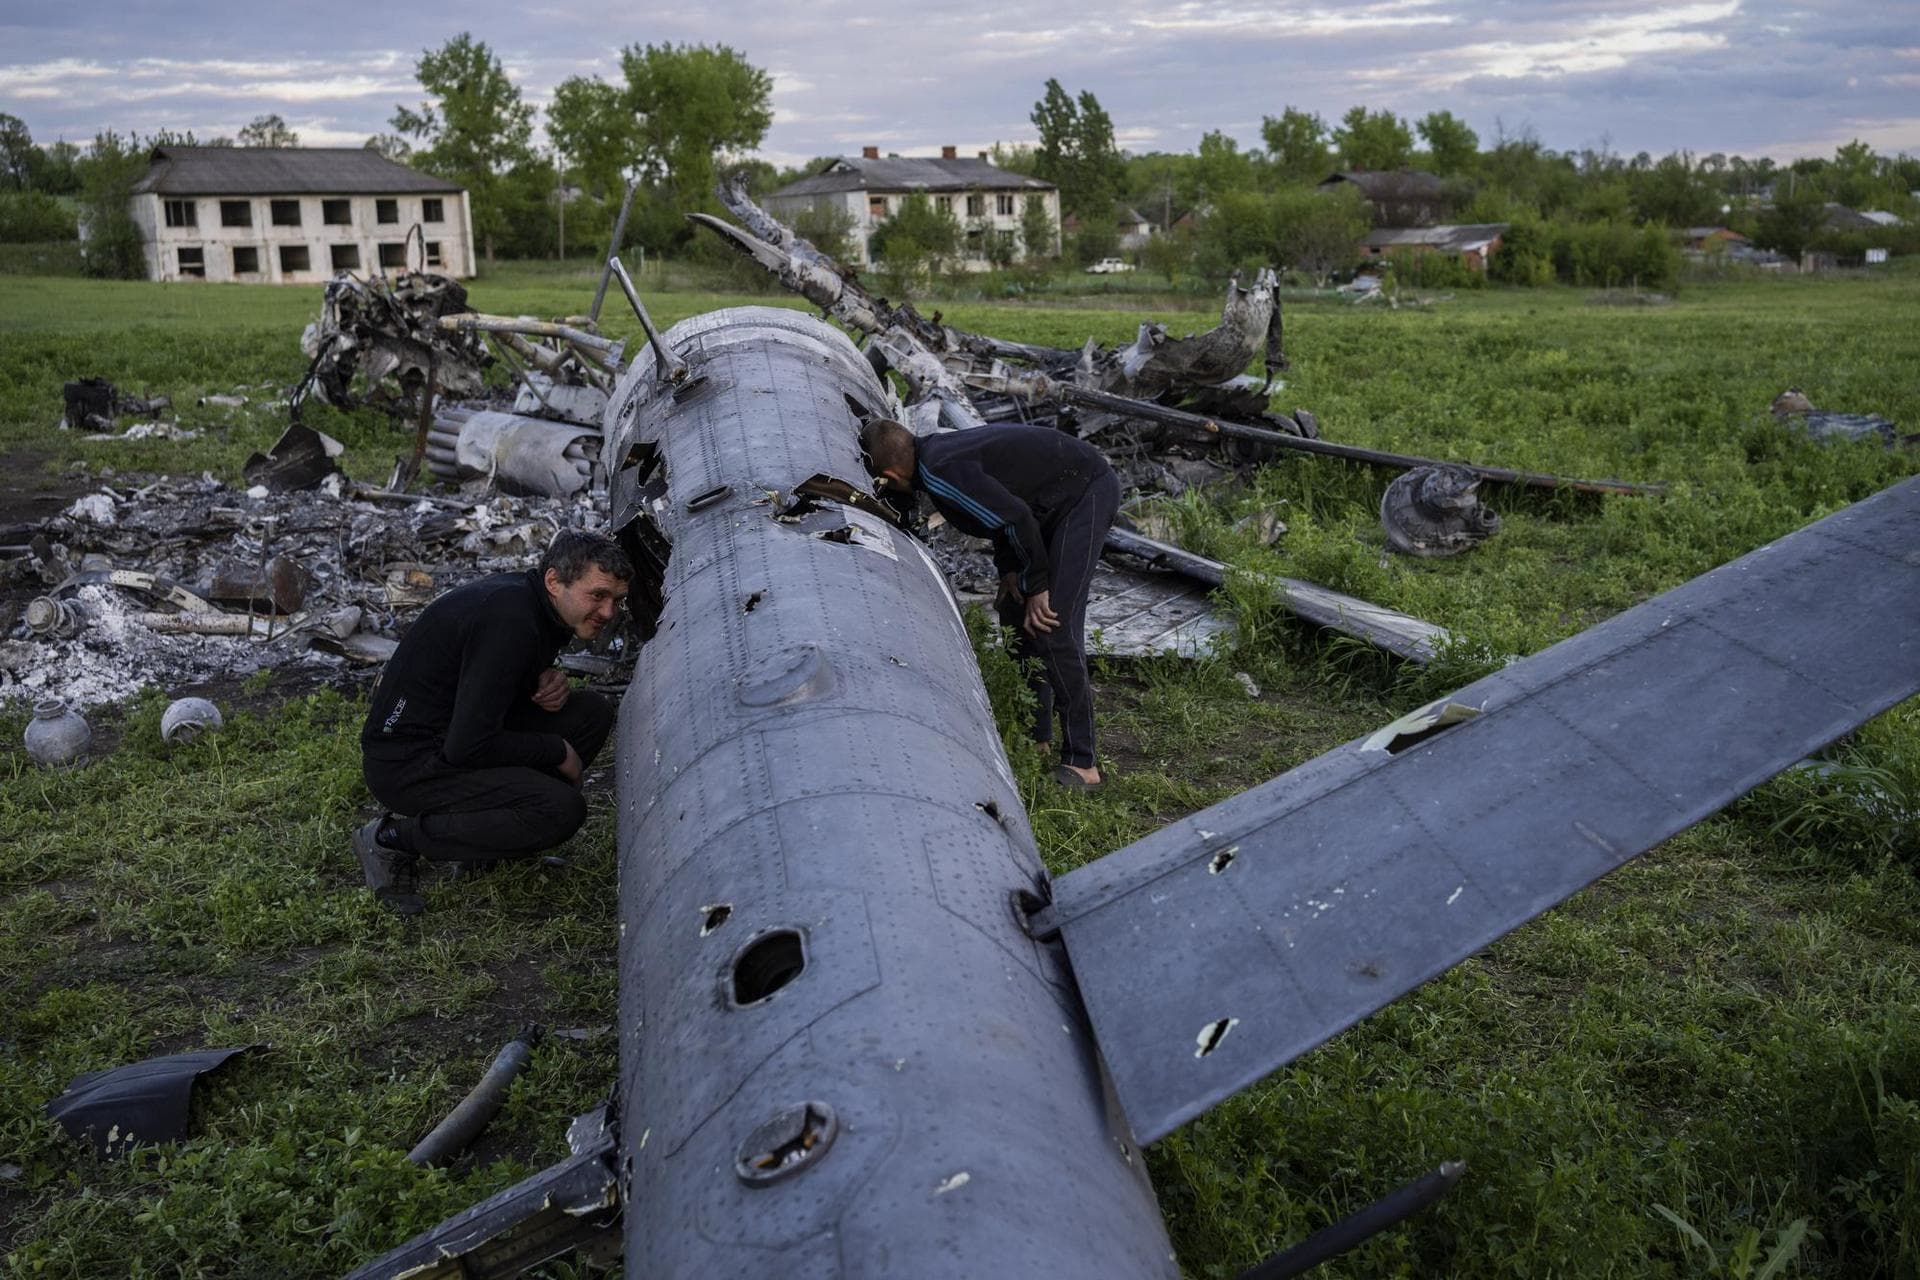 Oleksiy Polyakov, right, and Roman Voitko check the remains of a destroyed Russian helicopter that lies in a field in the village of Malaya Rohan, Kharkiv region